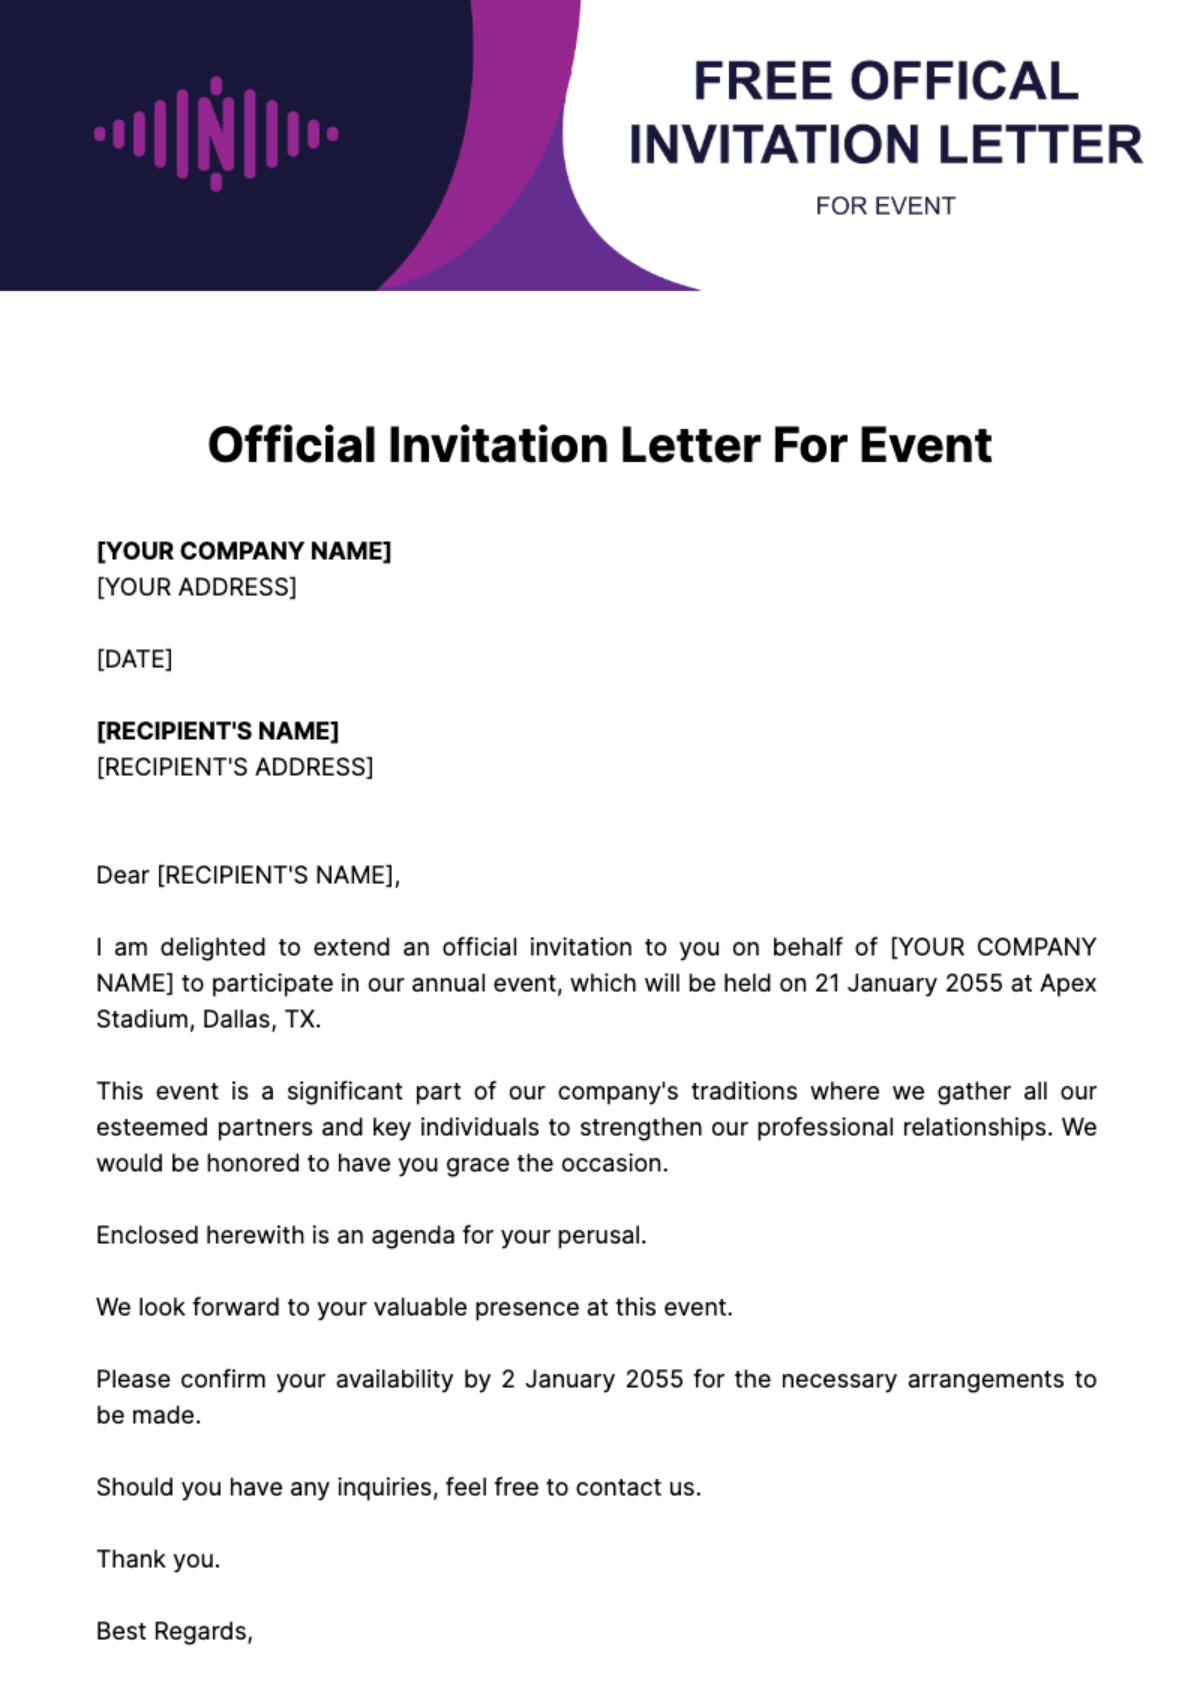 Free Official Invitation Letter for Event Template